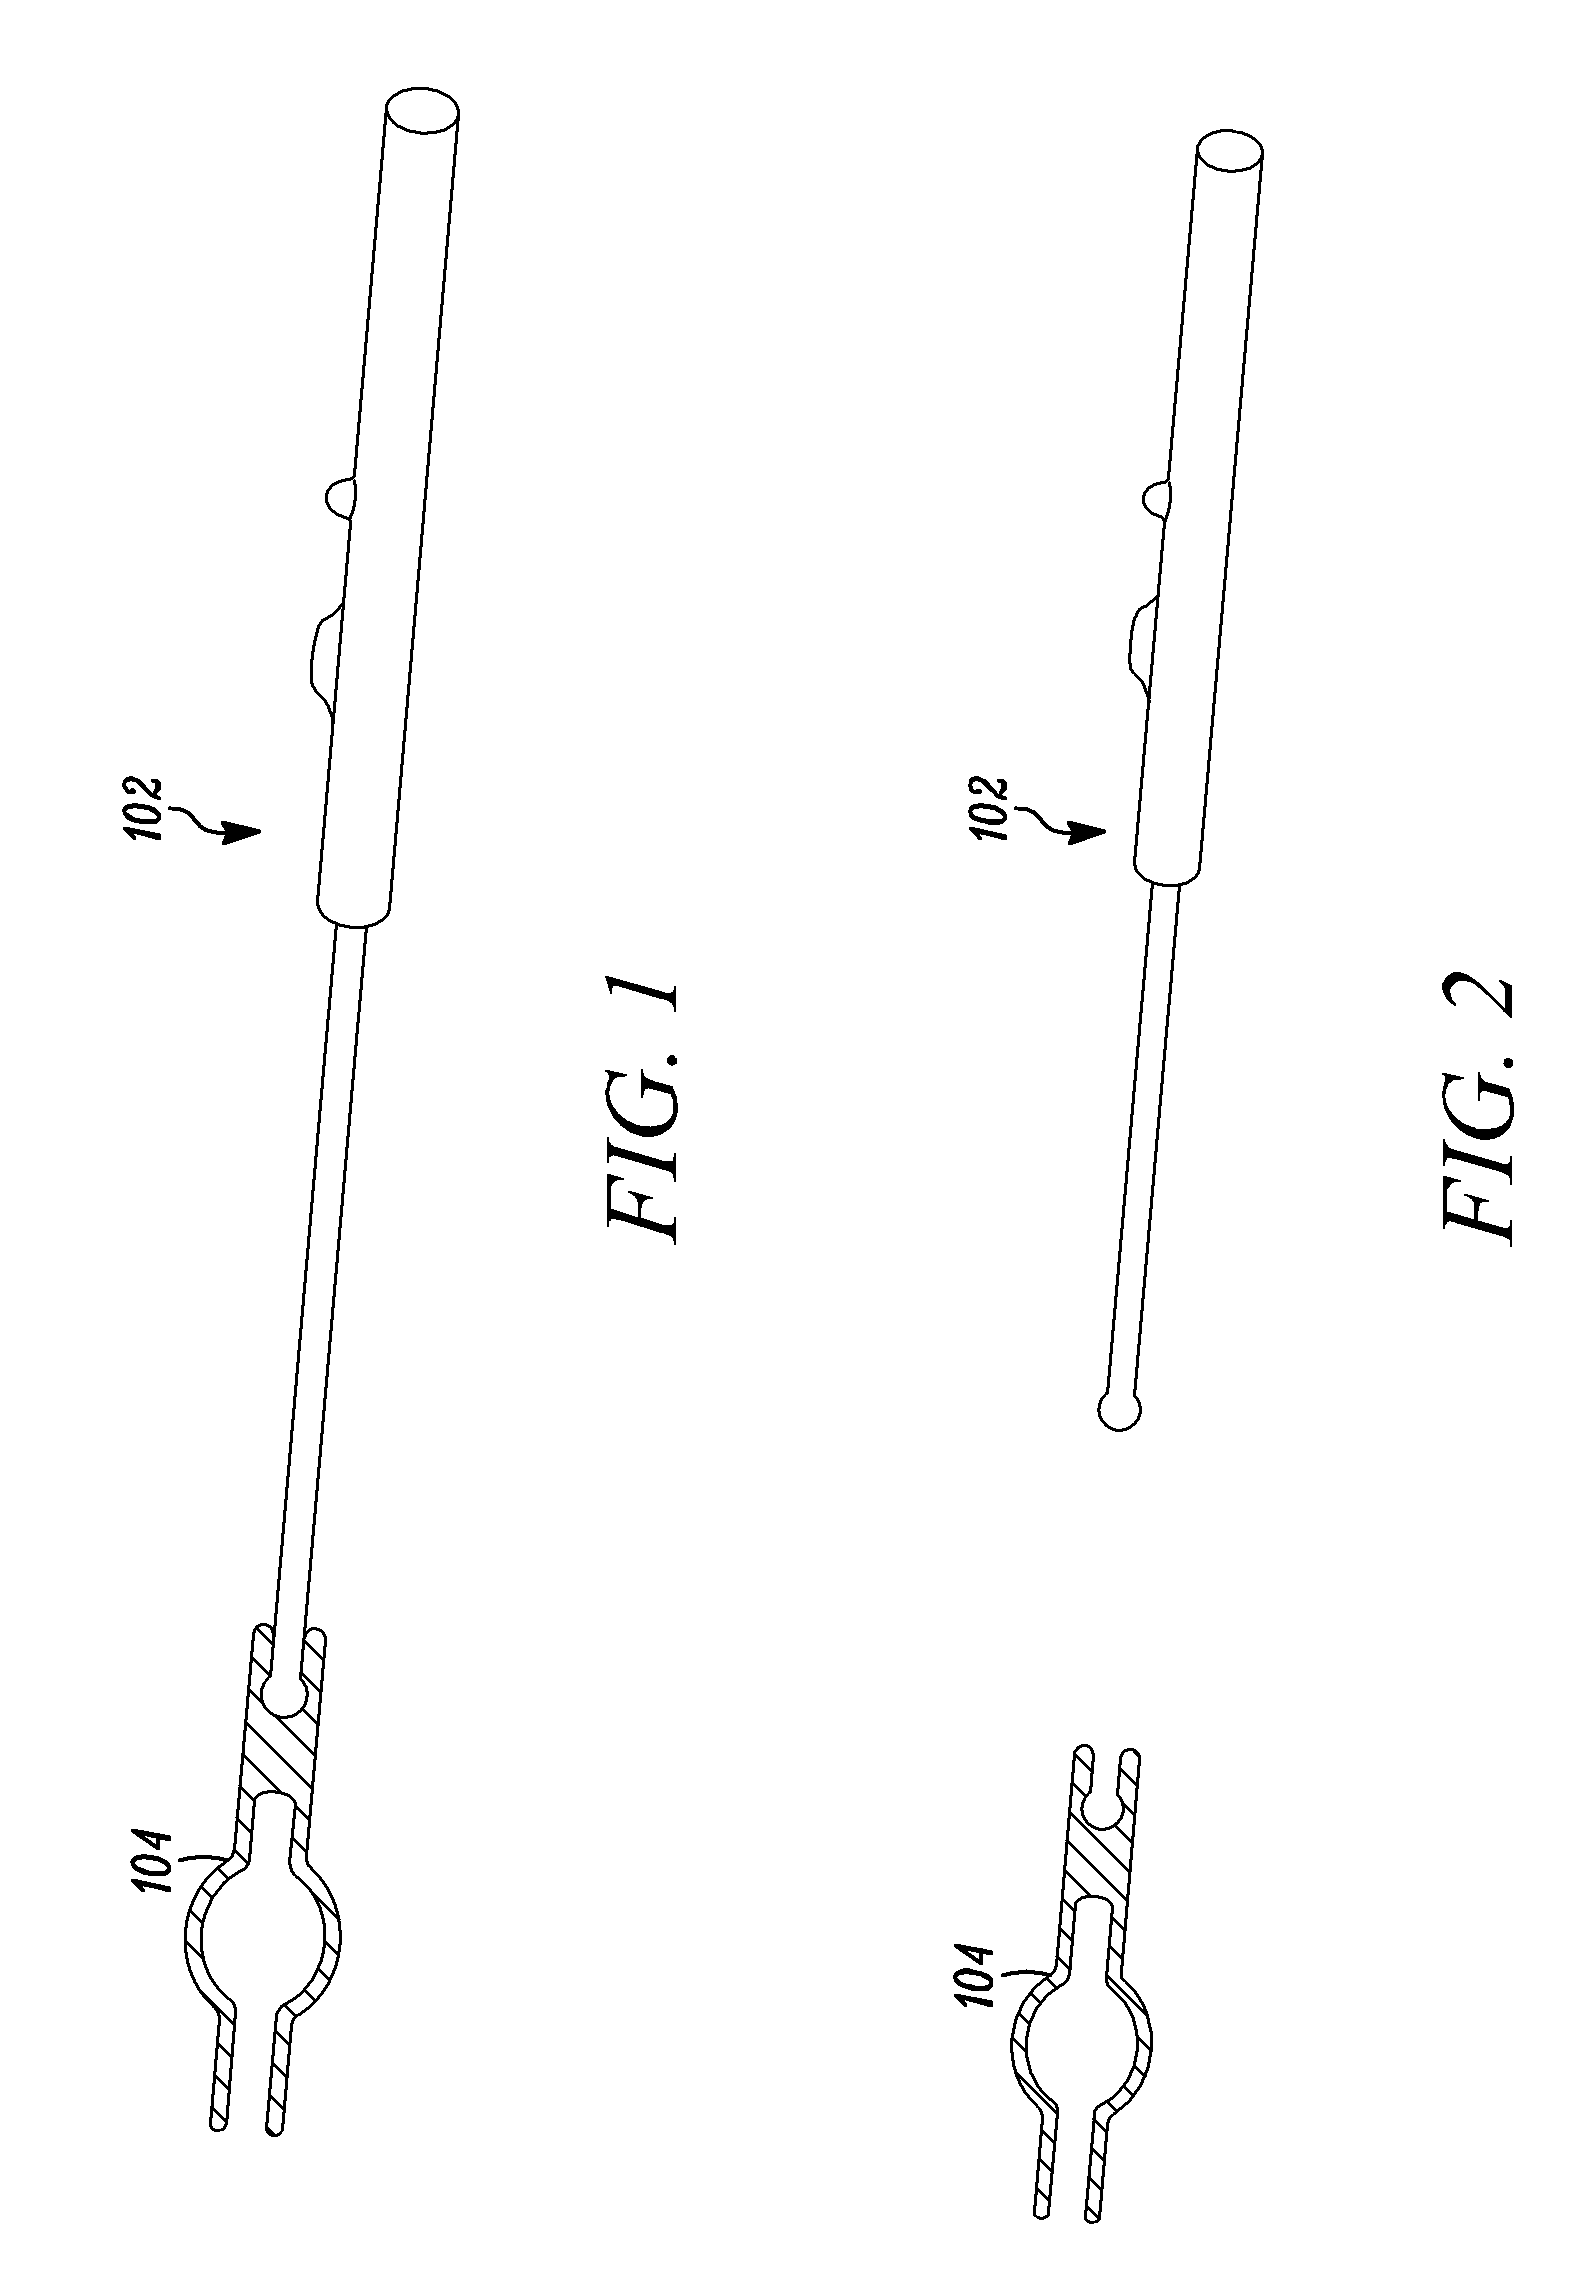 Neurophysiological apparatus and procedures